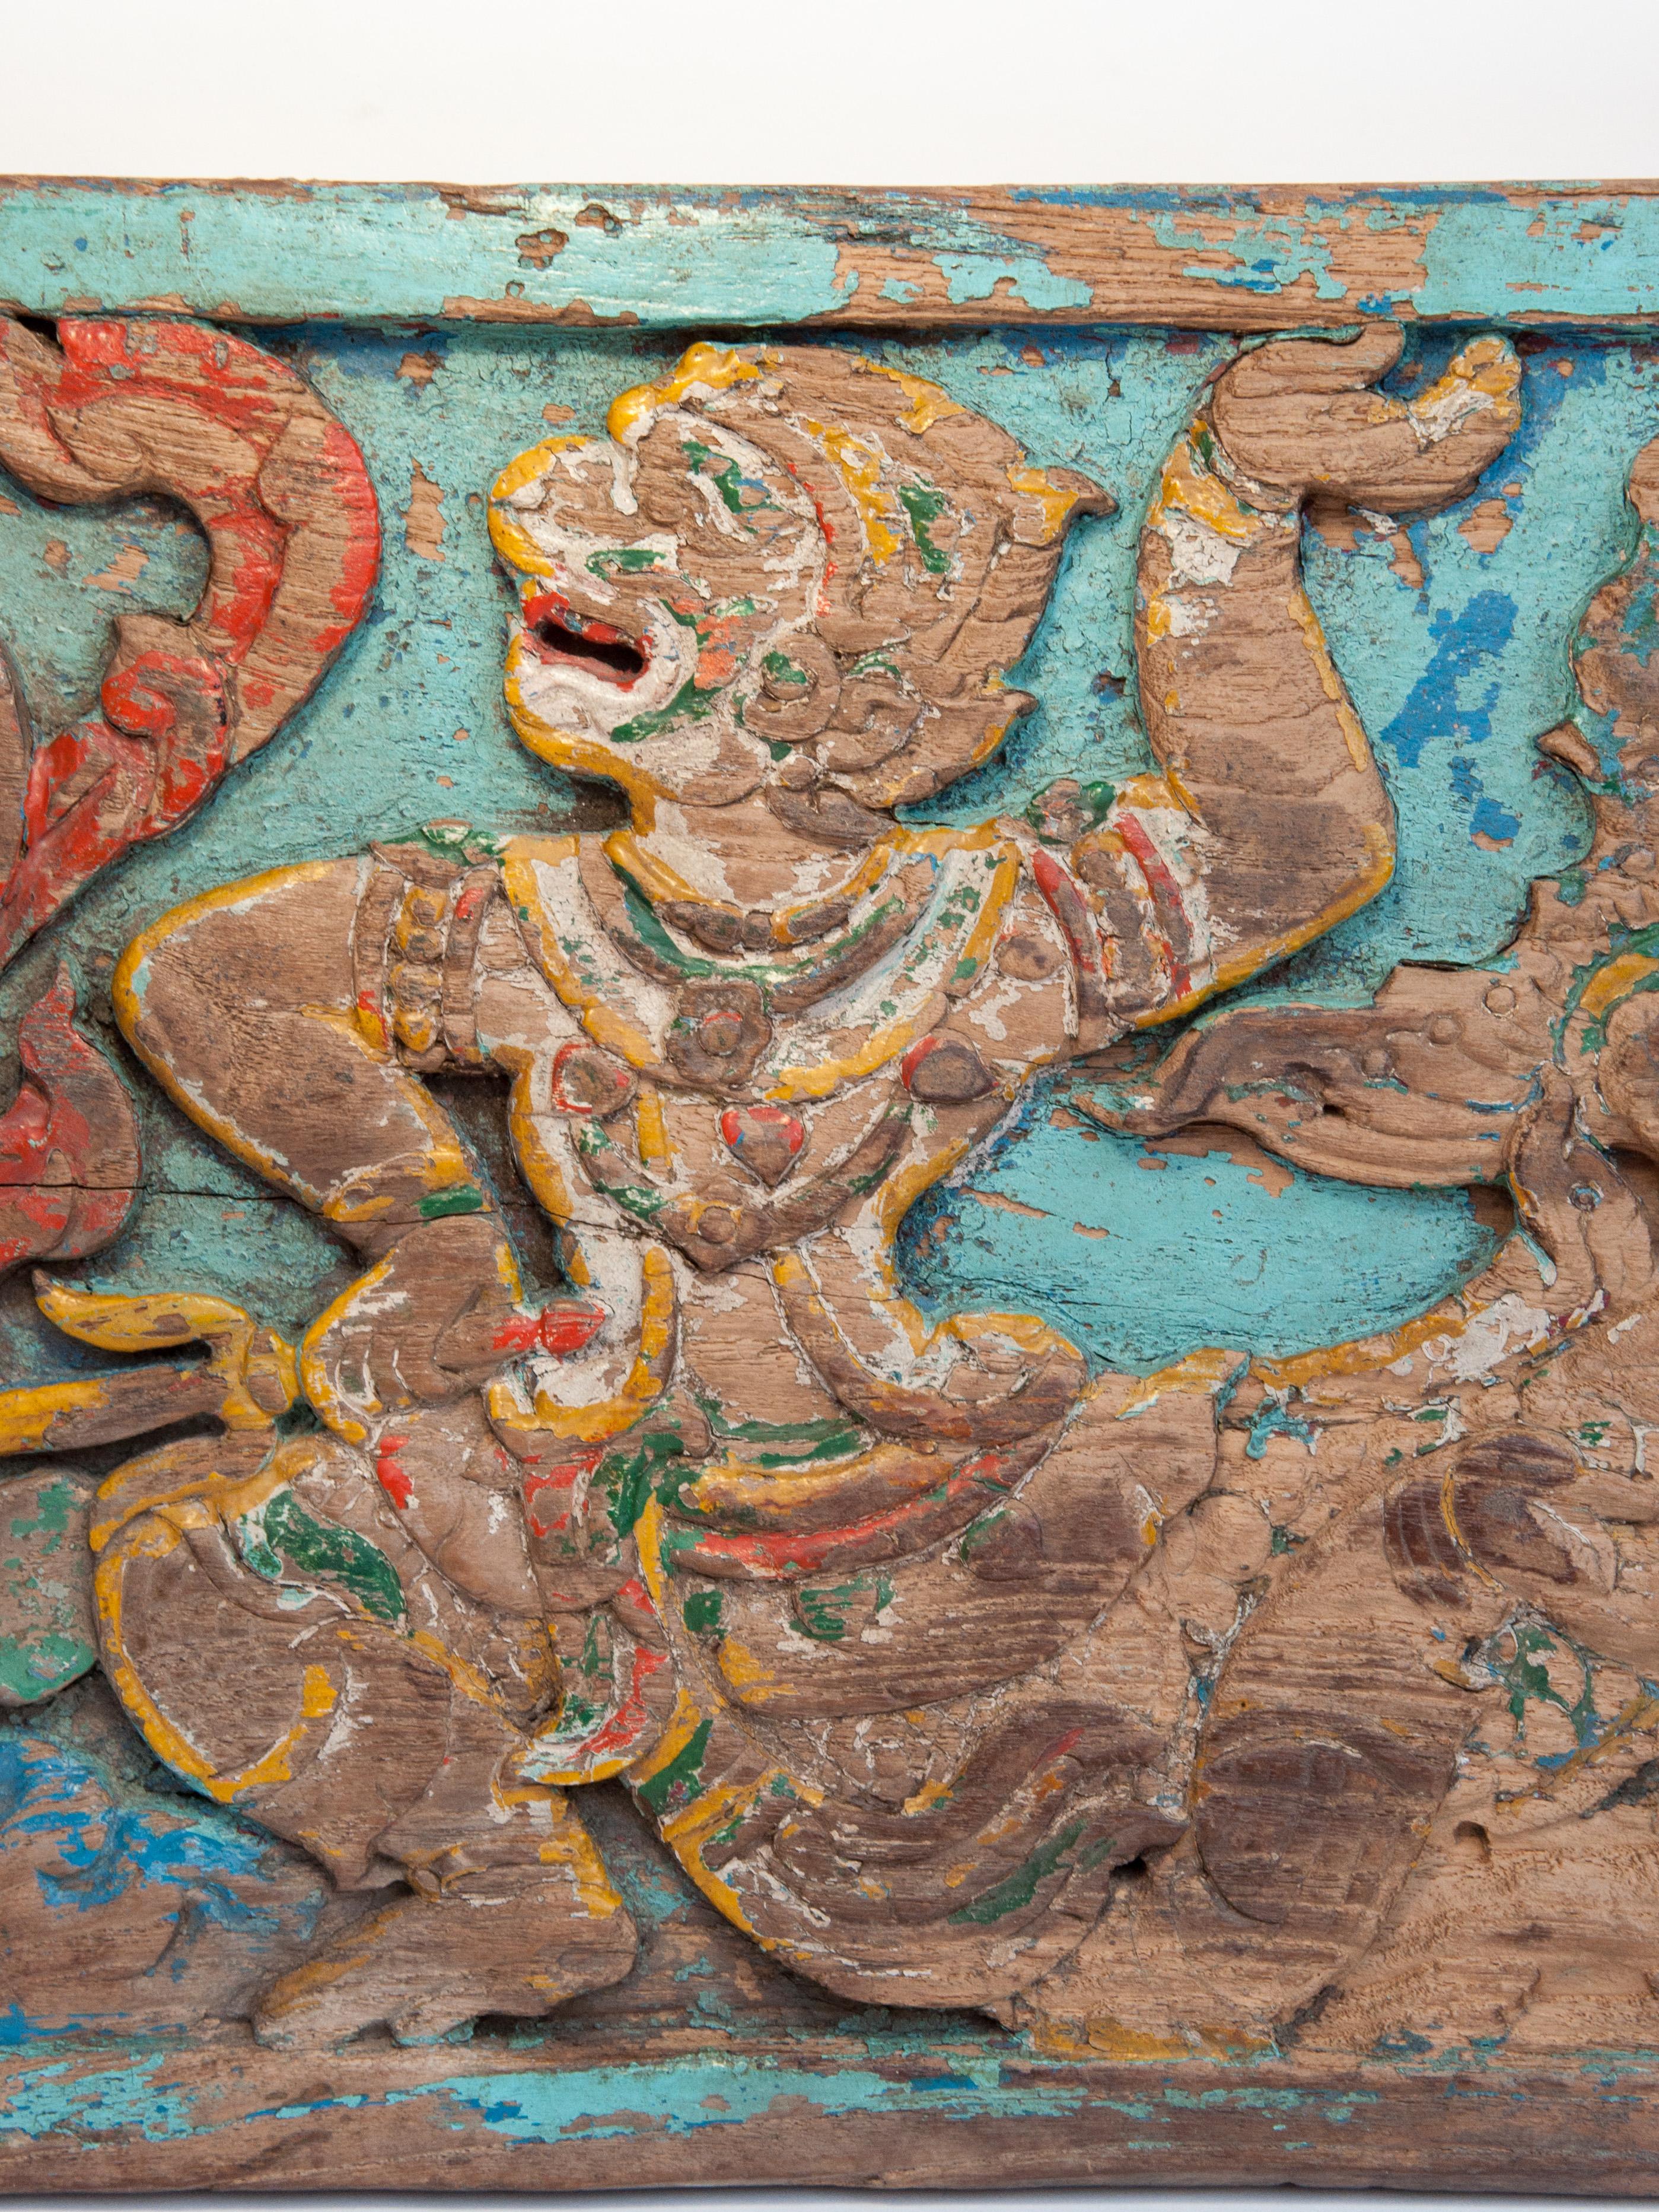 Vintage hand carved Panel from Thailand. Hanuman Motif, mid-20th century. This rustic old house or cart panel from northern Thailand depicts the much beloved character Hanuman, the divine monkey god and hero of the Hindu epic, the Ramayana.